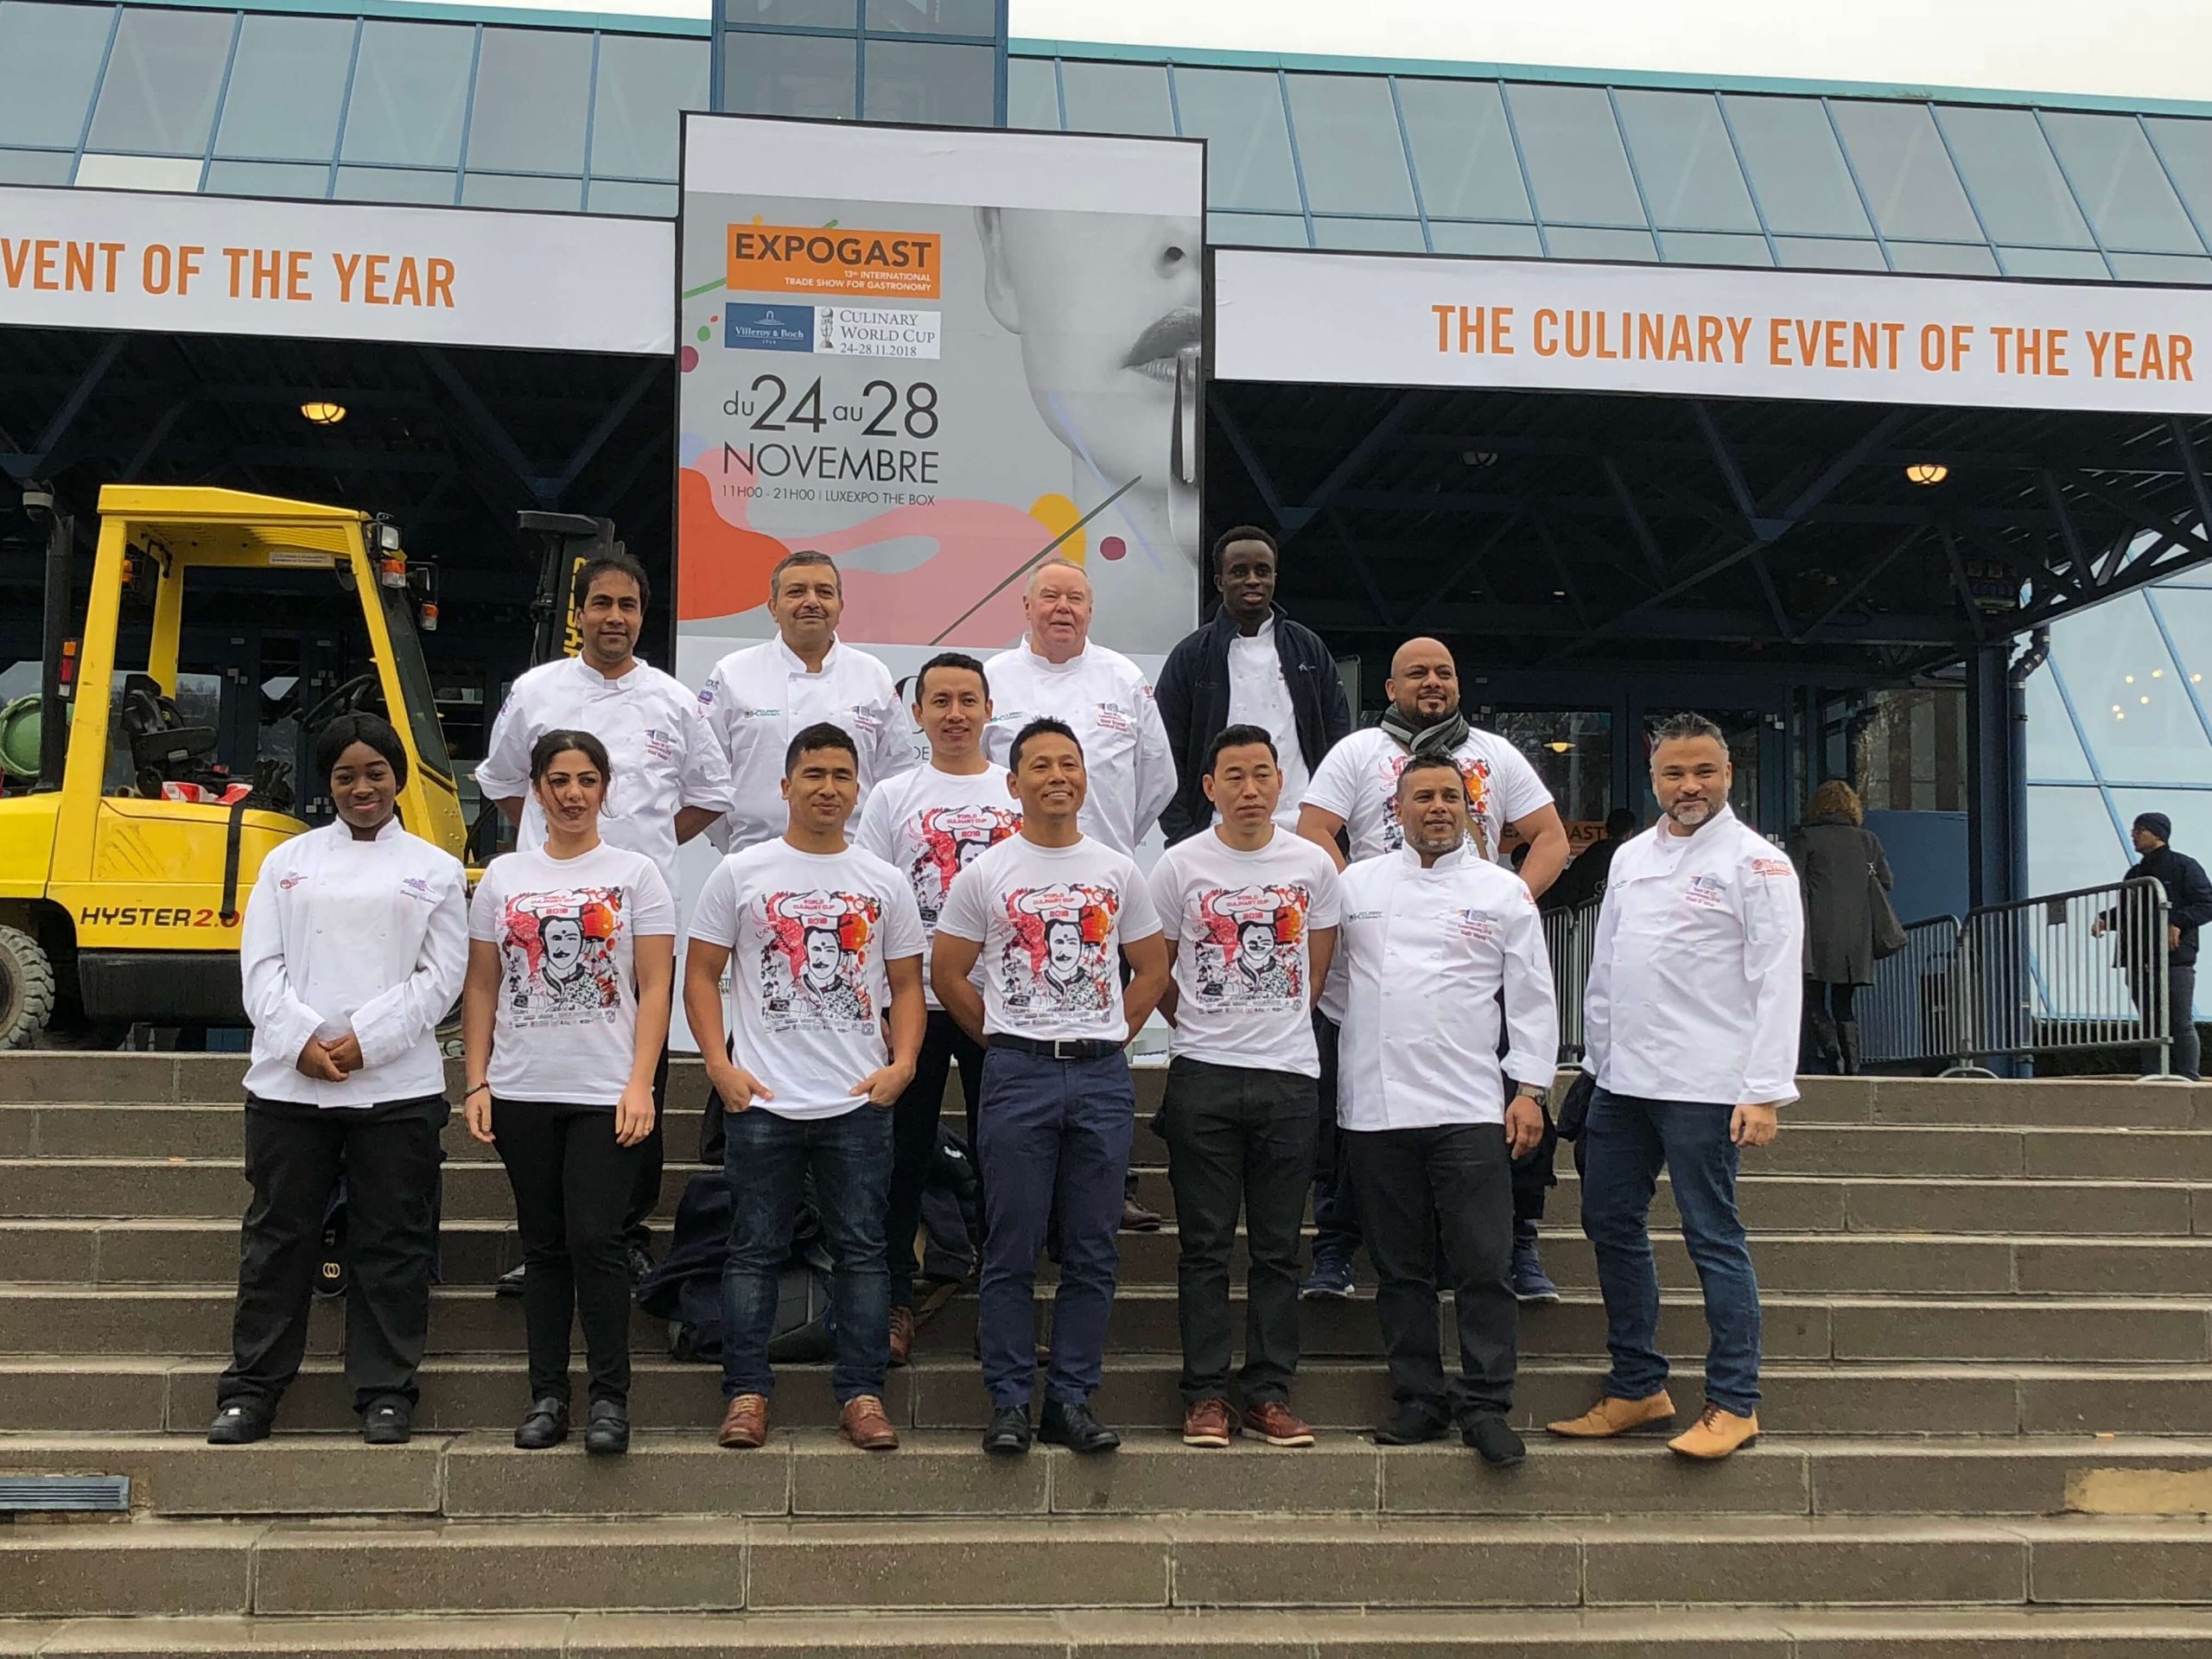 PART 1 – Journey to the 2018 Culinary World Cup, Luxembourg